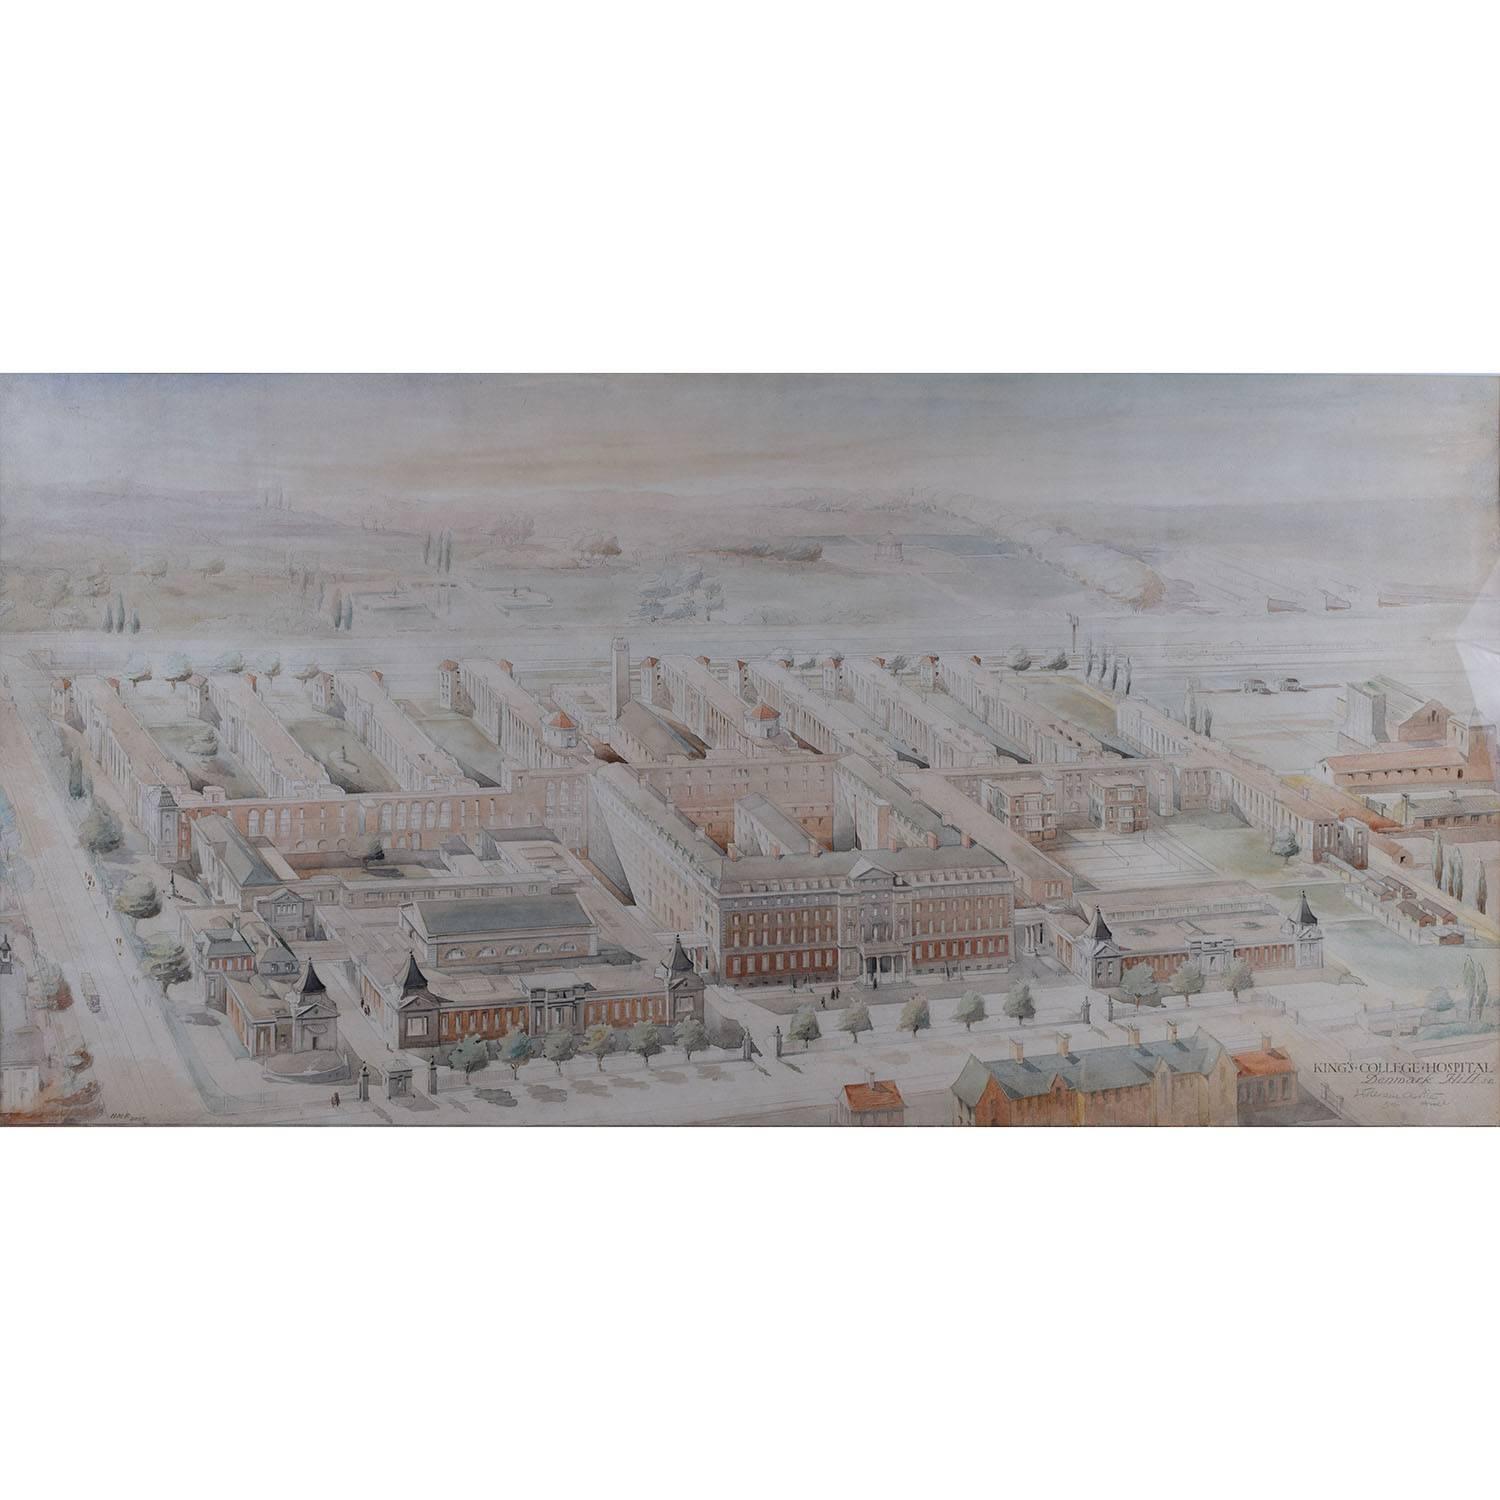 THE ARCHITECT'S ORIGINAL PROPOSAL FOR KING'S COLLEGE HOSPITAL

William Alfred Pite (1860-1949)
King`s College Hospital, Denmark Hill general bird`s-eye view (1913)
Initialled H.M.F., signed and titled by William A. Pite F.R.I.B.A. (1860-1949), lower